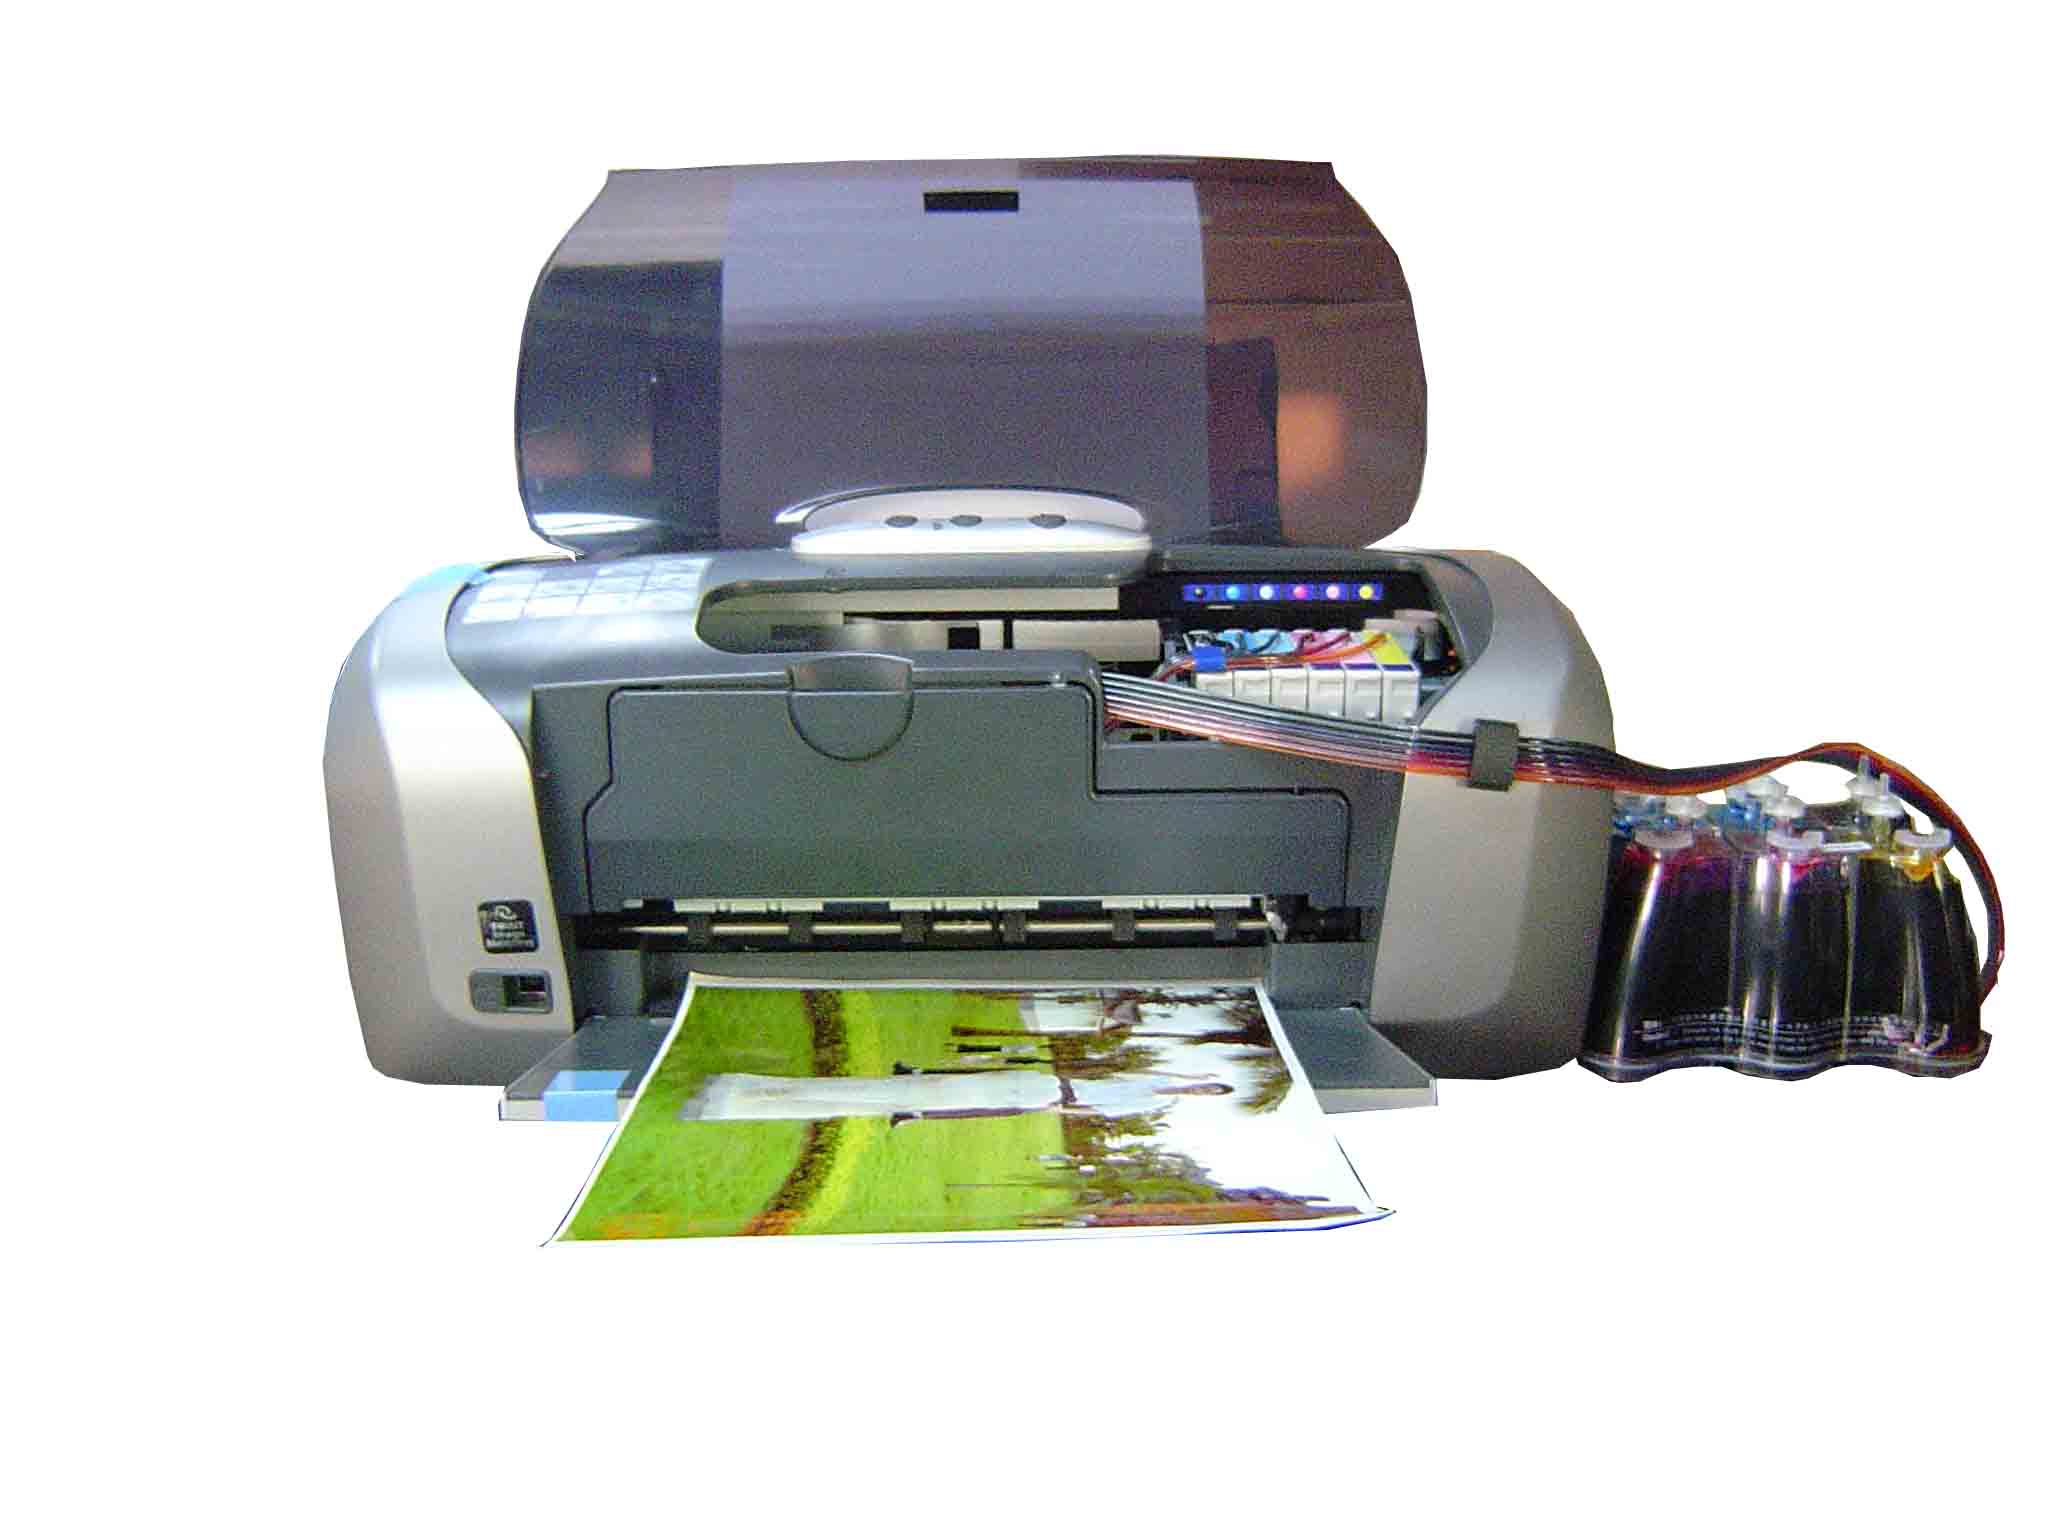 Fully set-up ready to go CIS system installed in printer